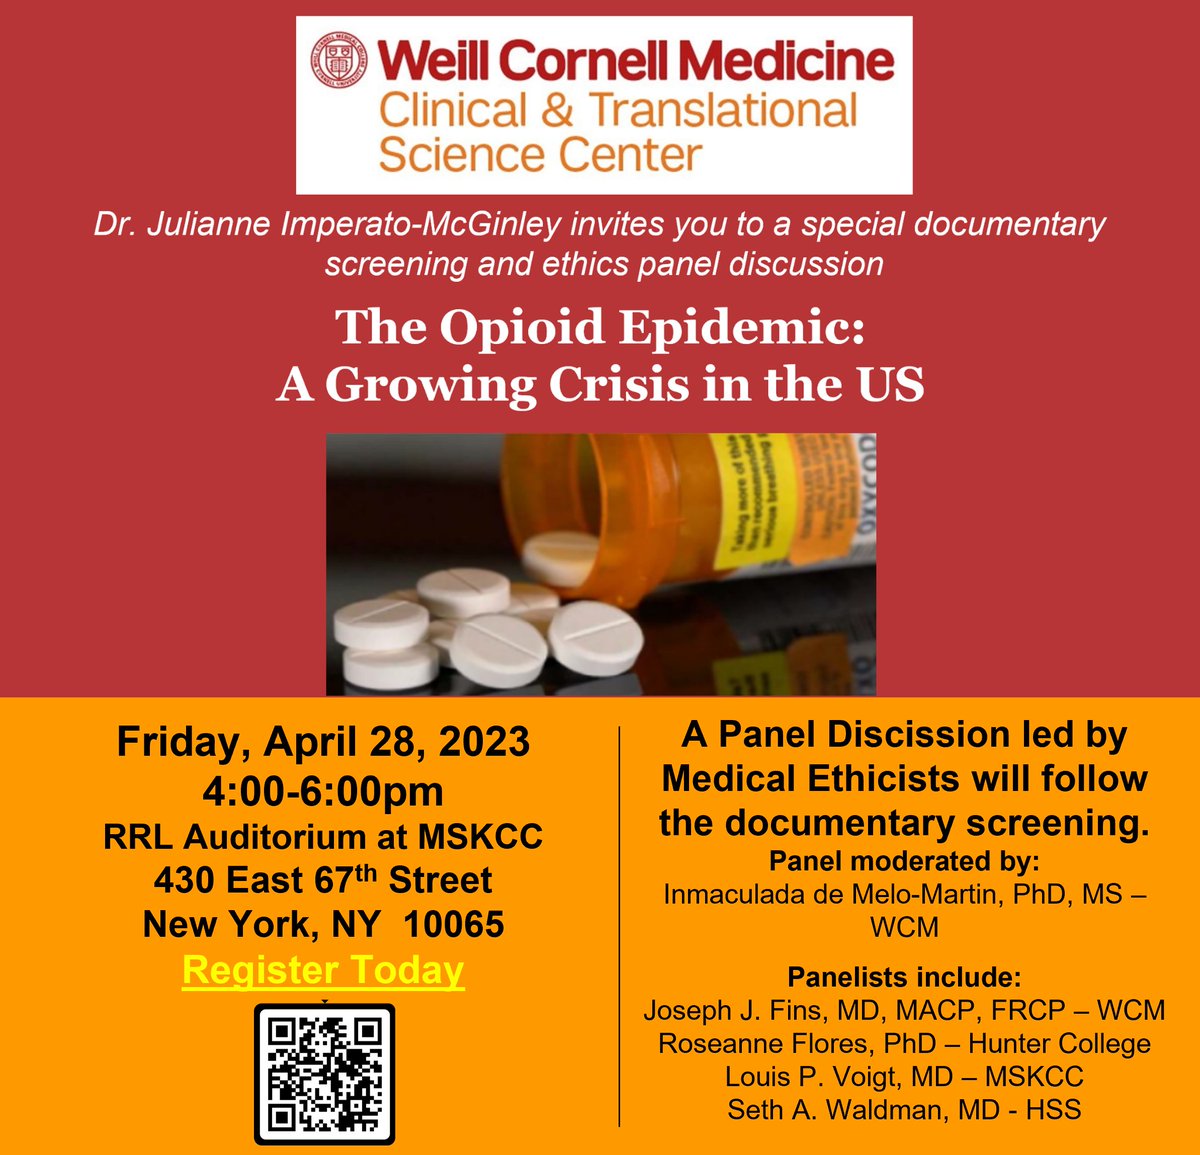 Join us @WCMC_CTSC for a special documentary screening and ethics panel discussion on the Opioid Crisis on Friday, April 28, 2023 at 4:00pm. Click to register: eventbrite.com/e/the-opioid-e… @WeillCornell #opioid #opioidcrisis